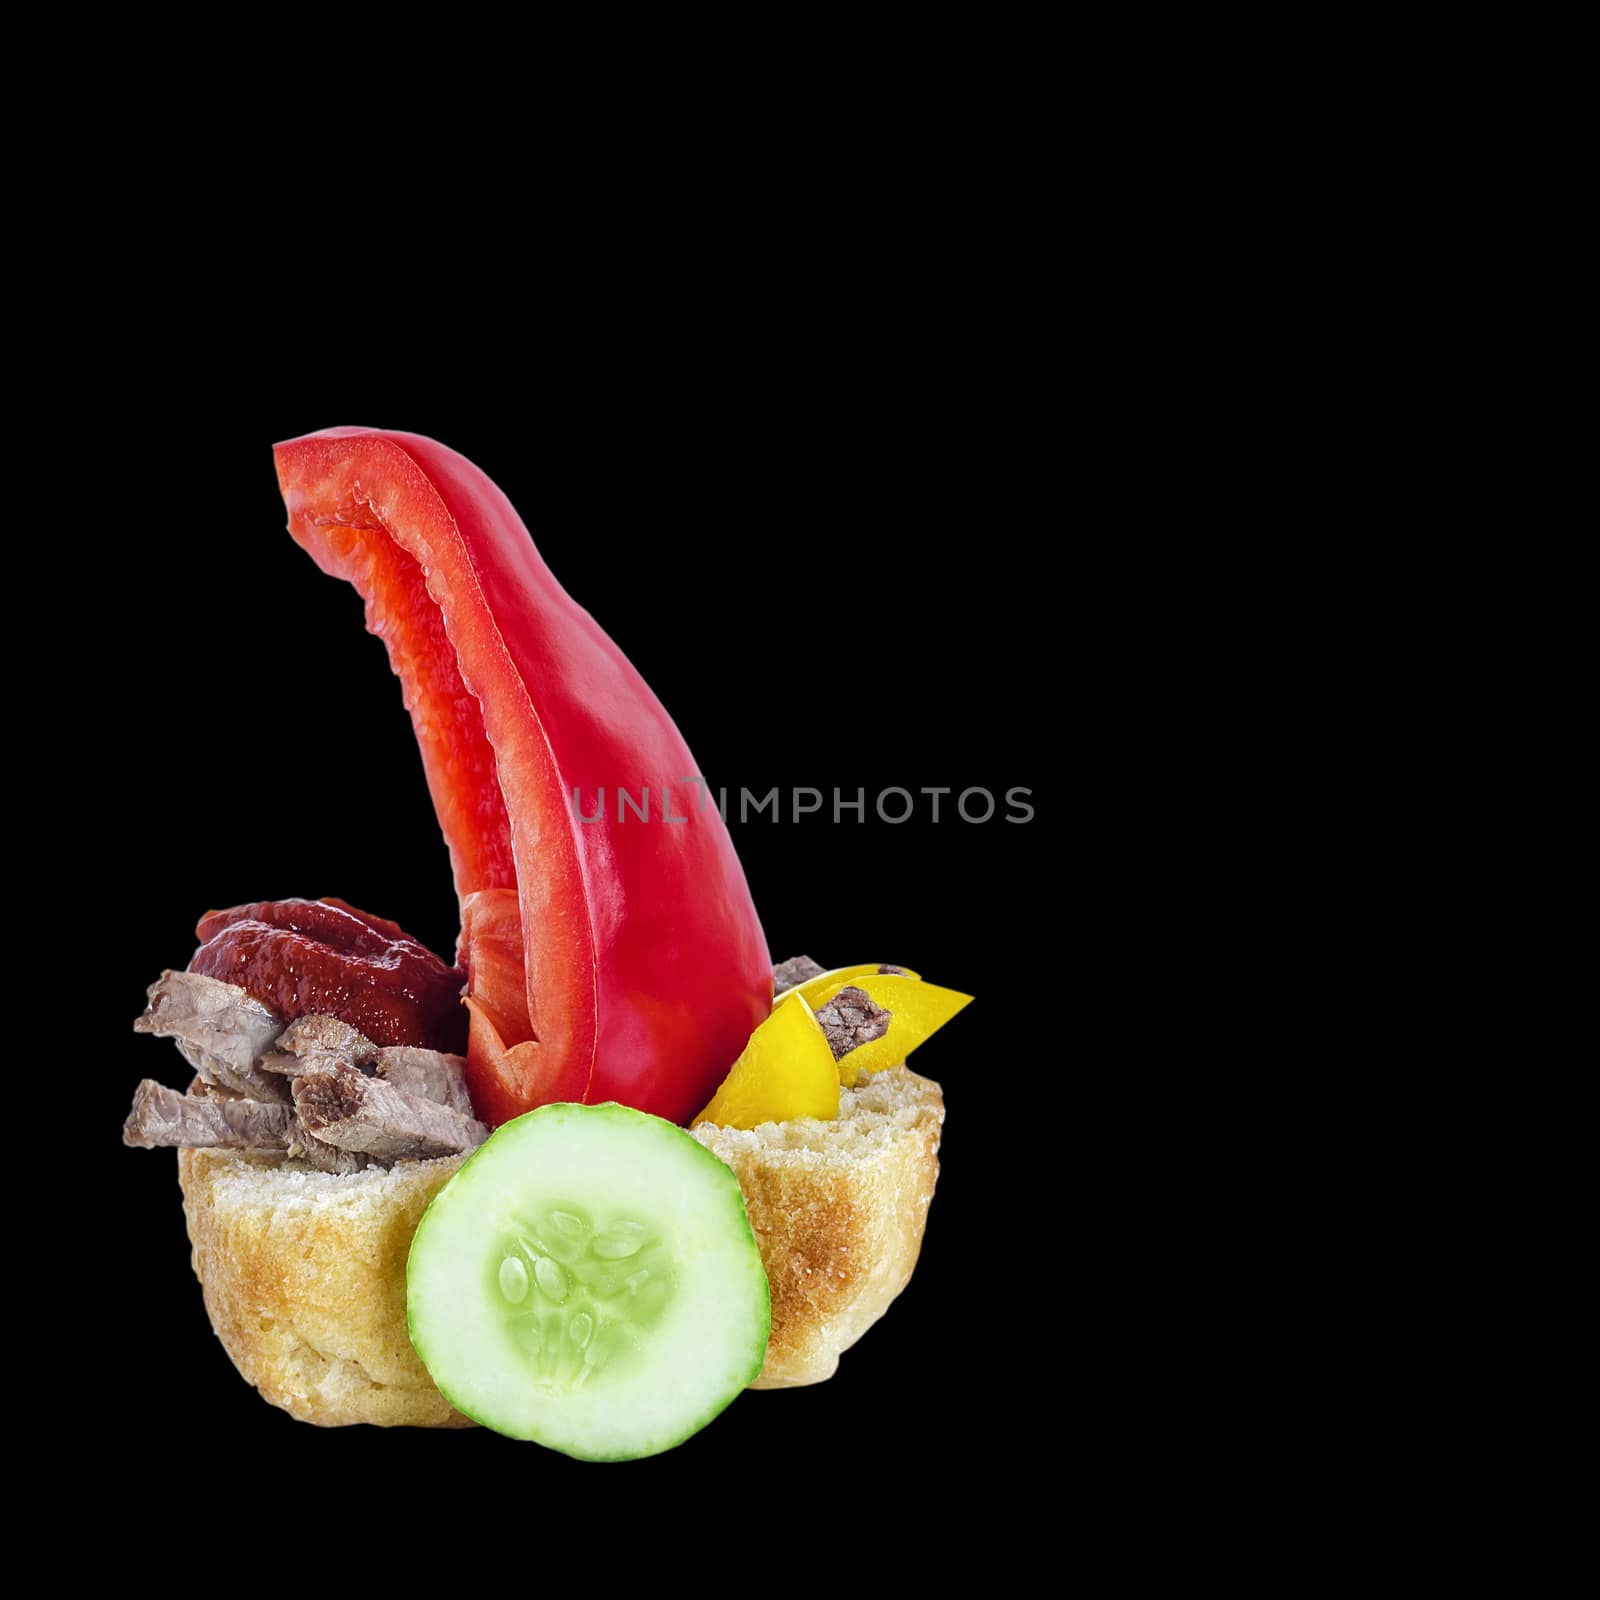 Sandwich with meat and vegetables, and ketchup on a black background. In the form of a boat for kids.